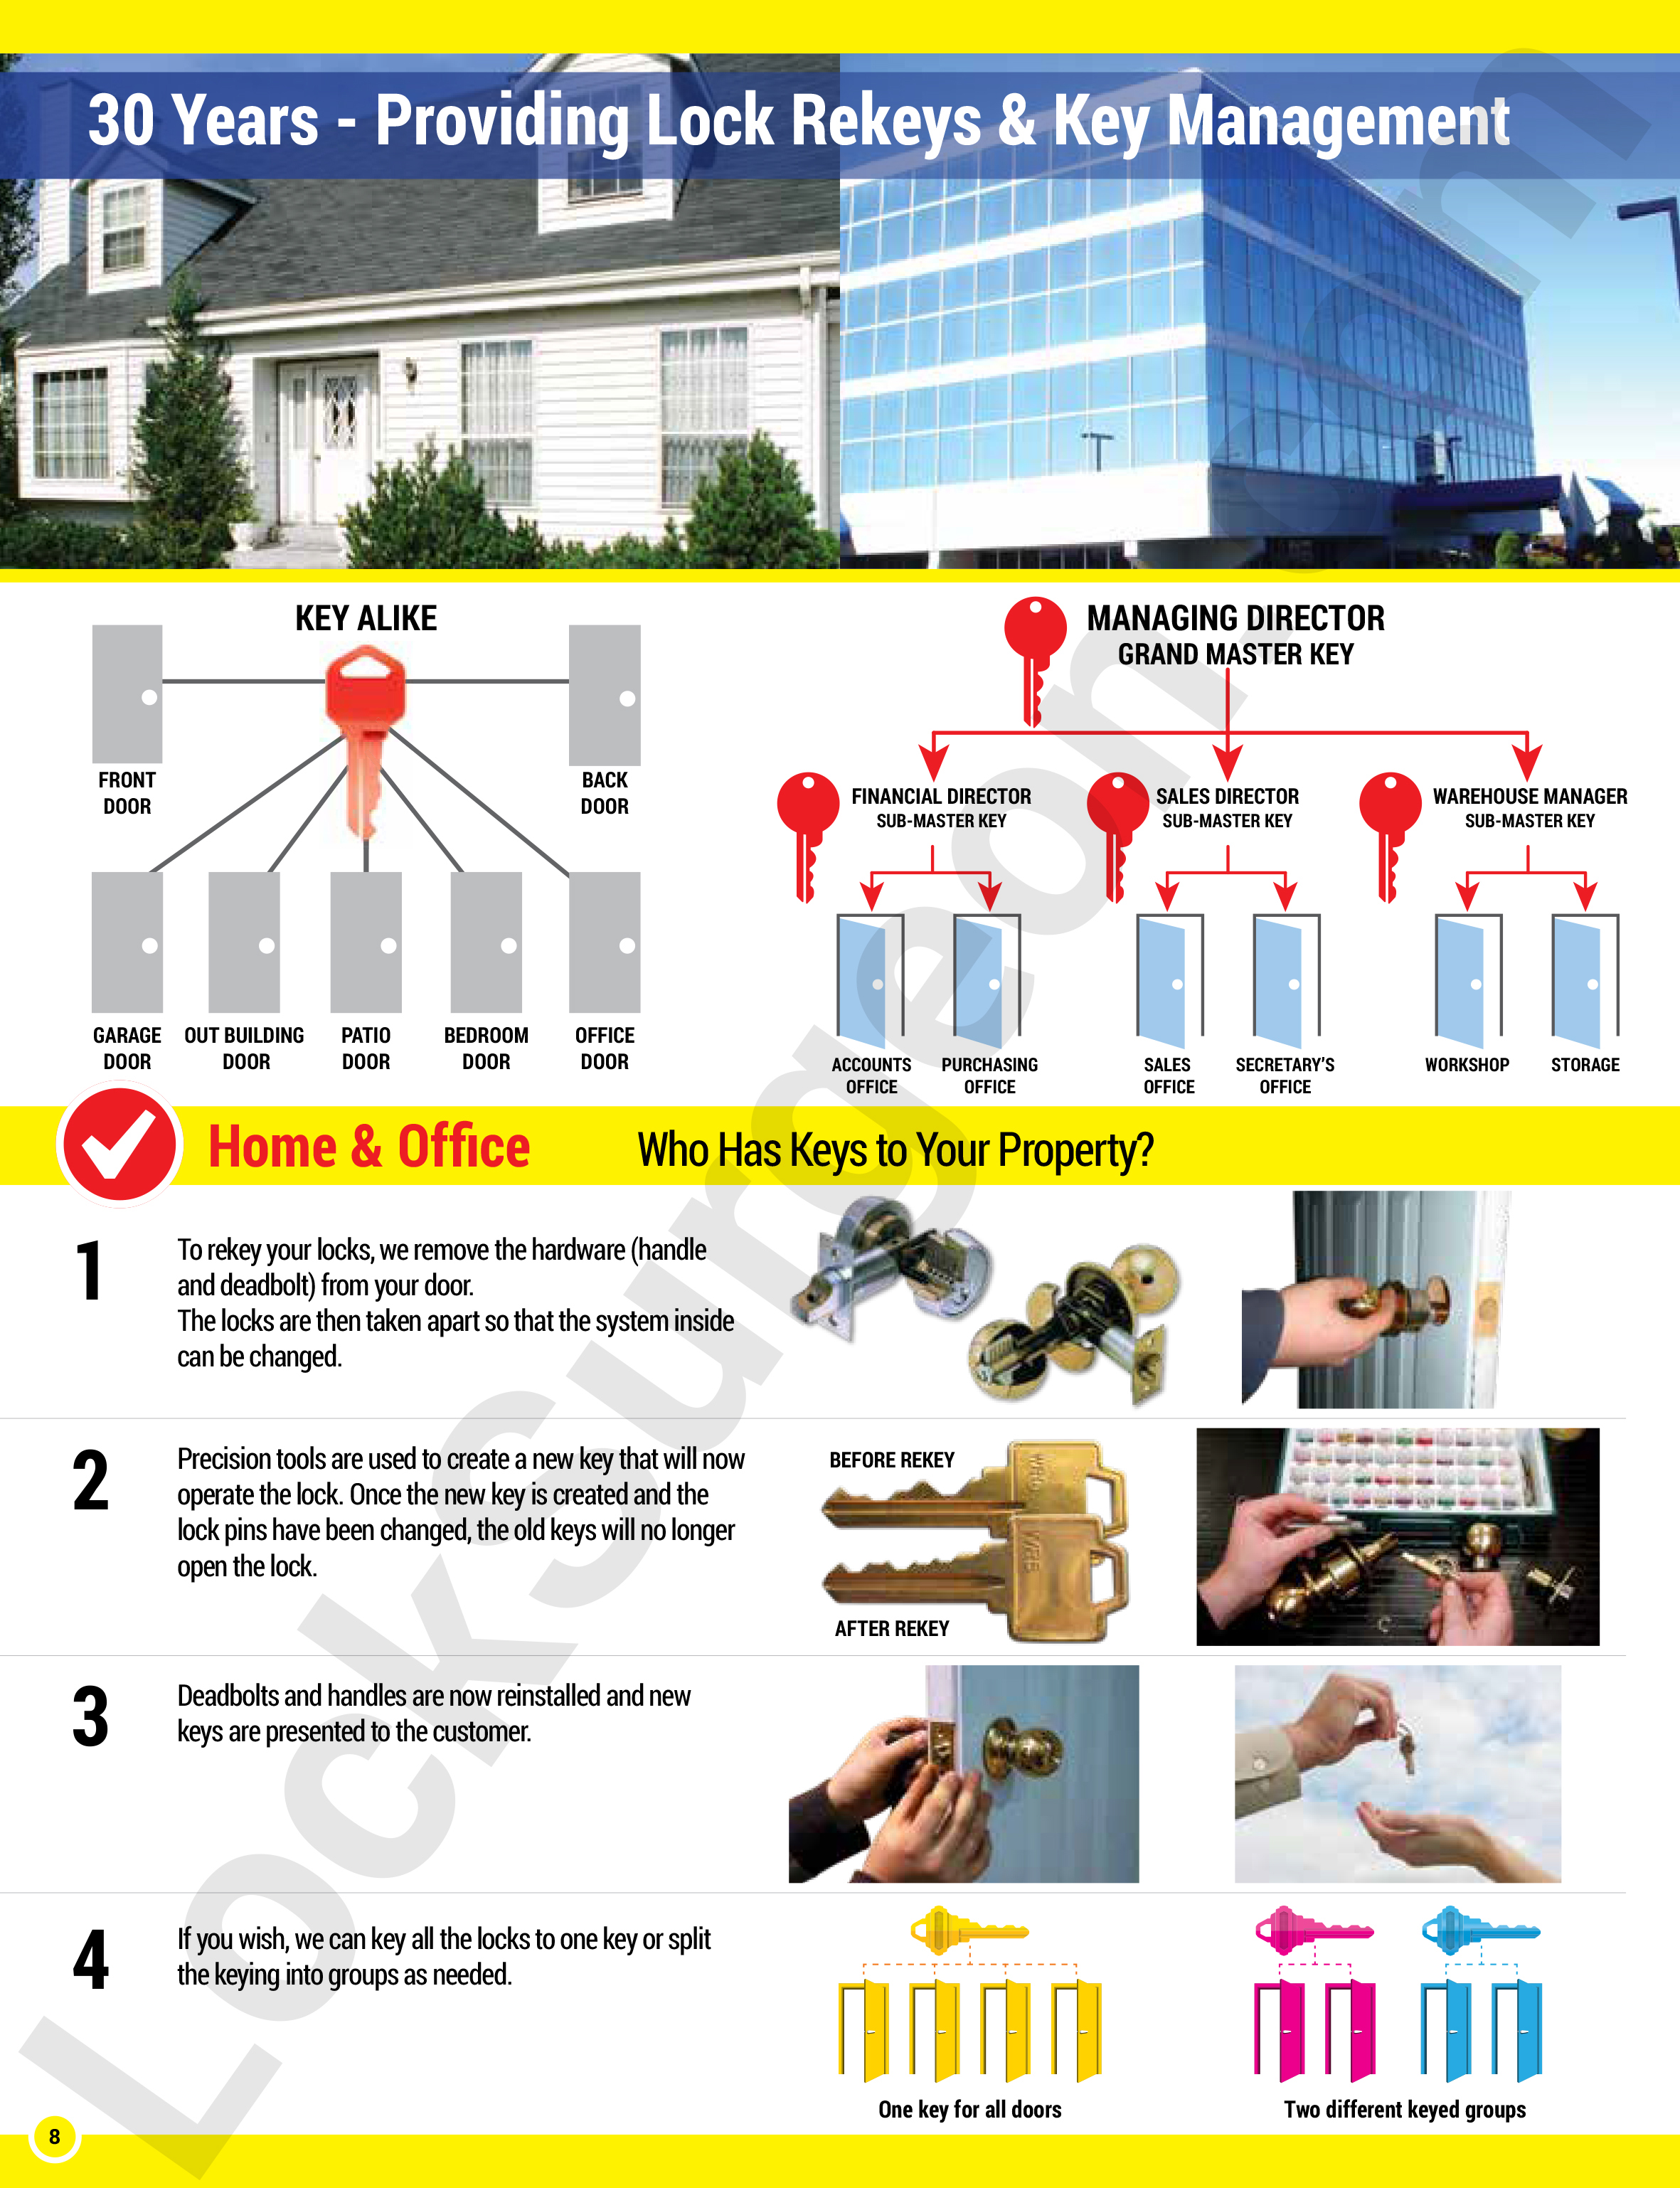 Lock Surgeon rekey locks for home or business build master key systems to control keys.